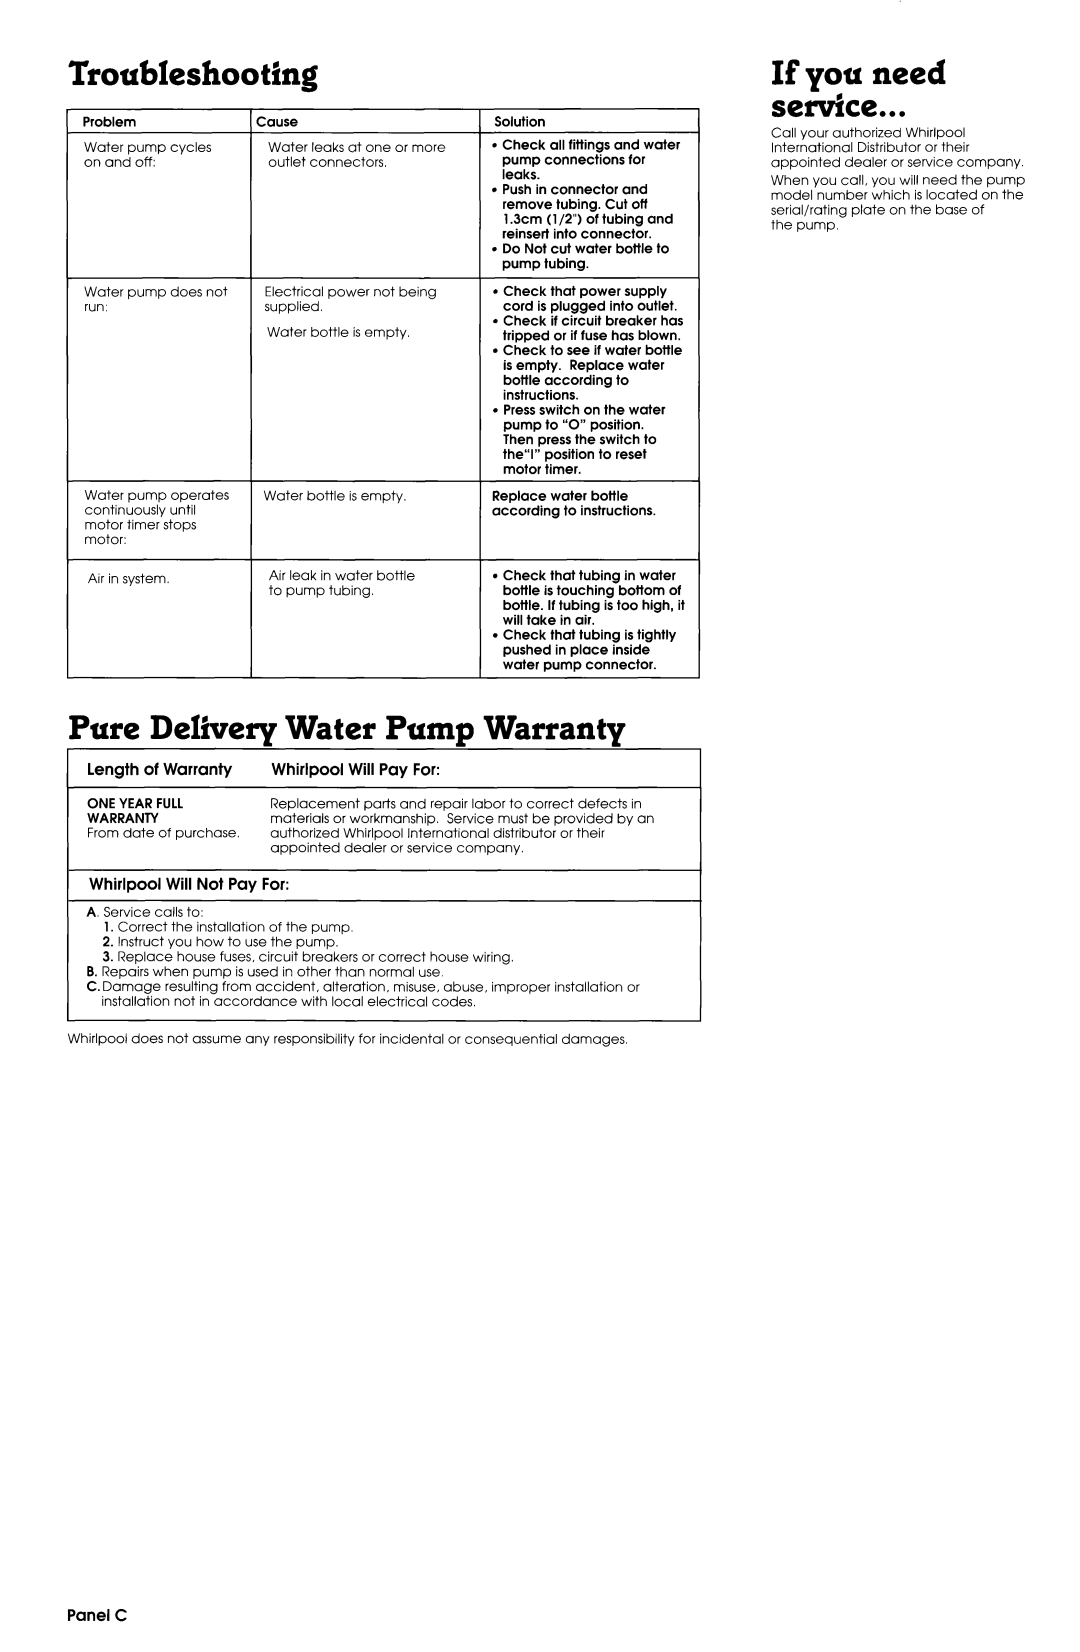 Whirlpool 4373526 Troubleshooting, If you need semice, Pure Deliver-vWater Puma Warrantv, Length of Warranty, Whirlpool 